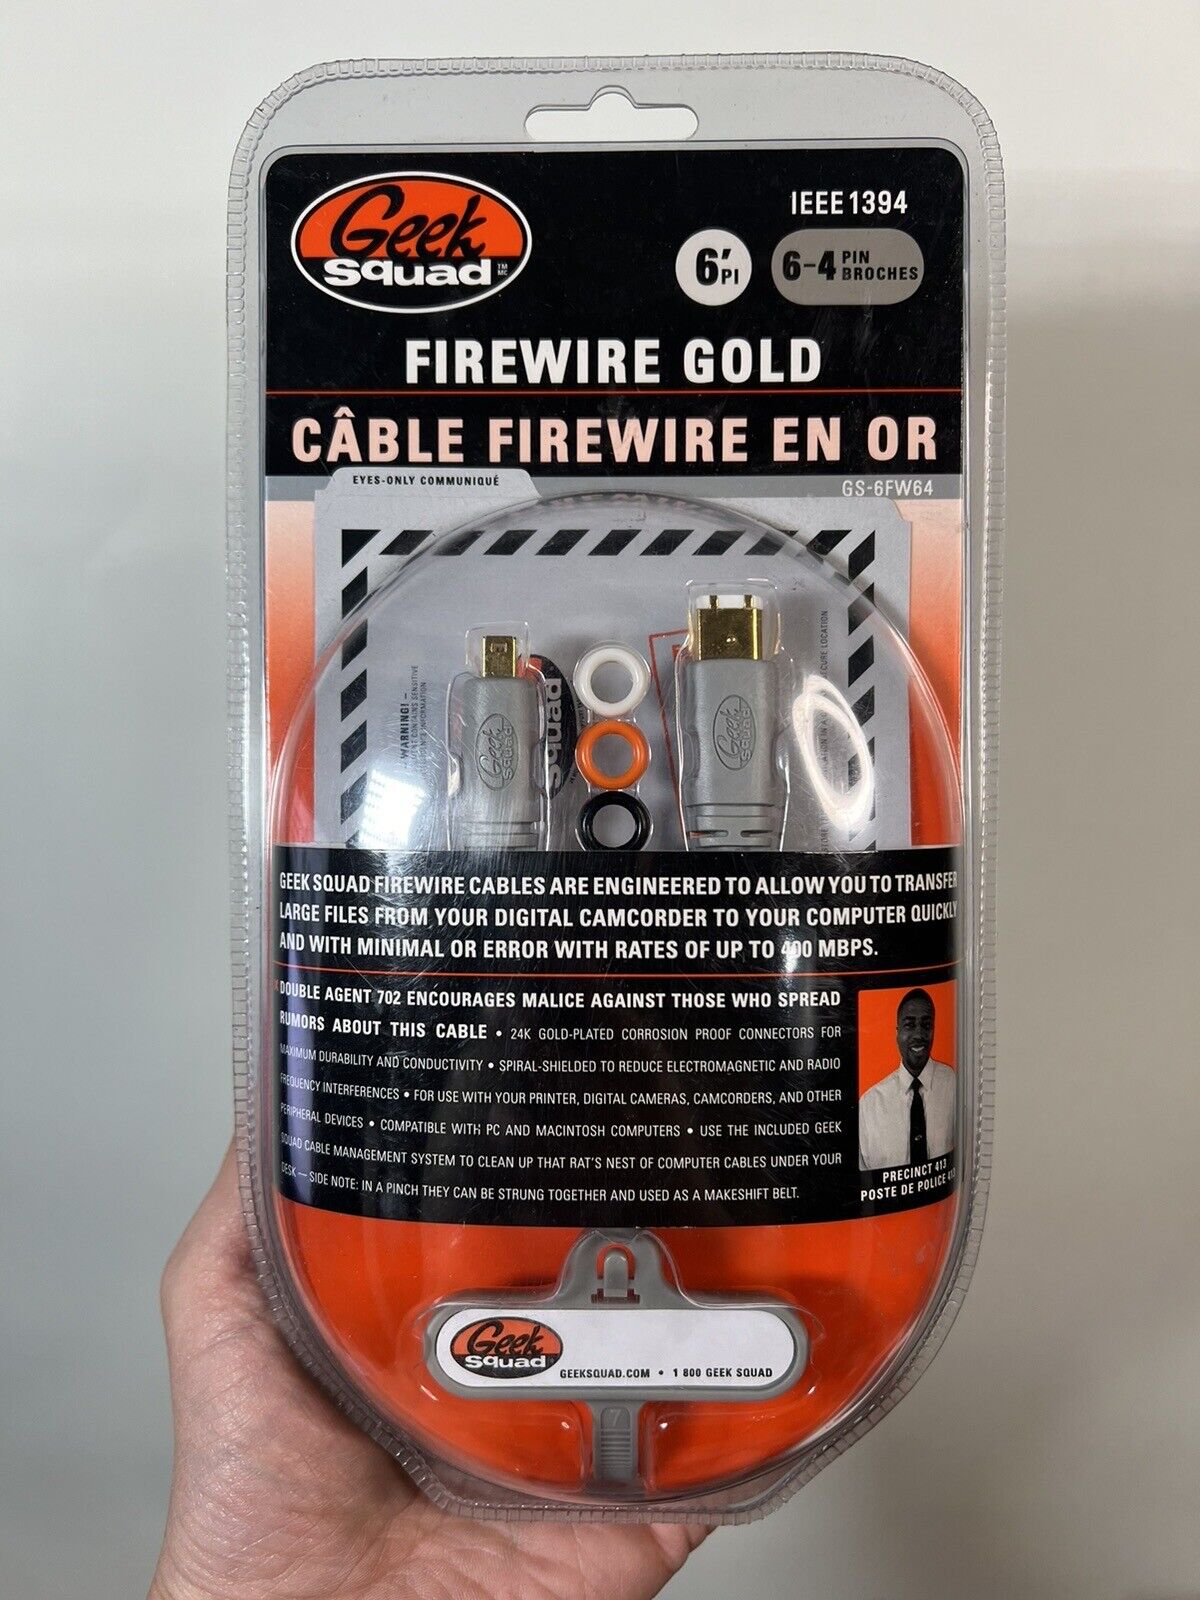 Geek Squad Firewire Gold 6’ Cable 6-4 Pin GS-6FW64 IEEE 1394 UPC:600603101731